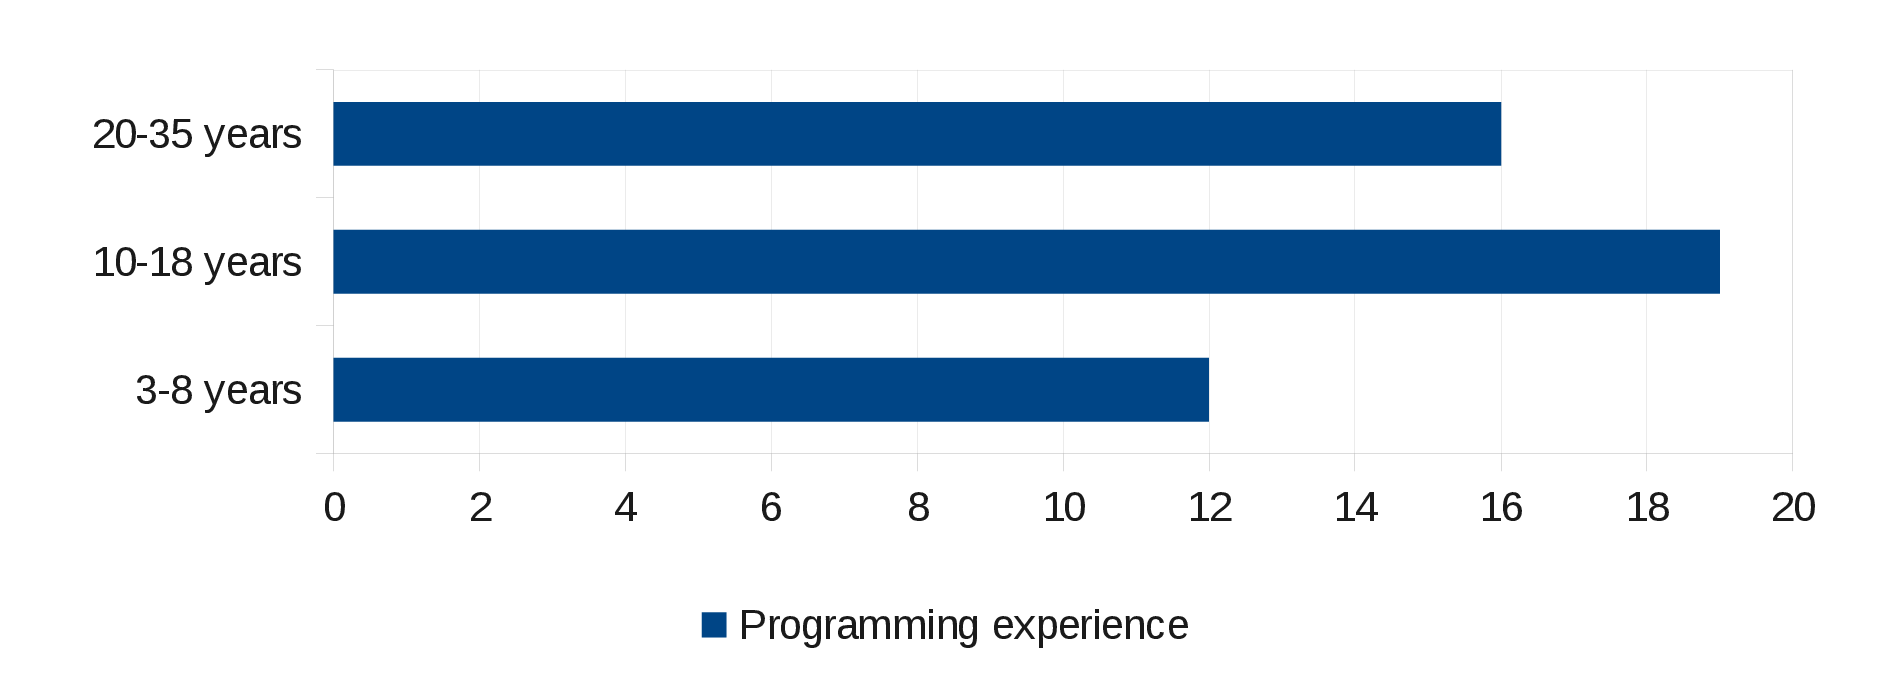 Programming experience